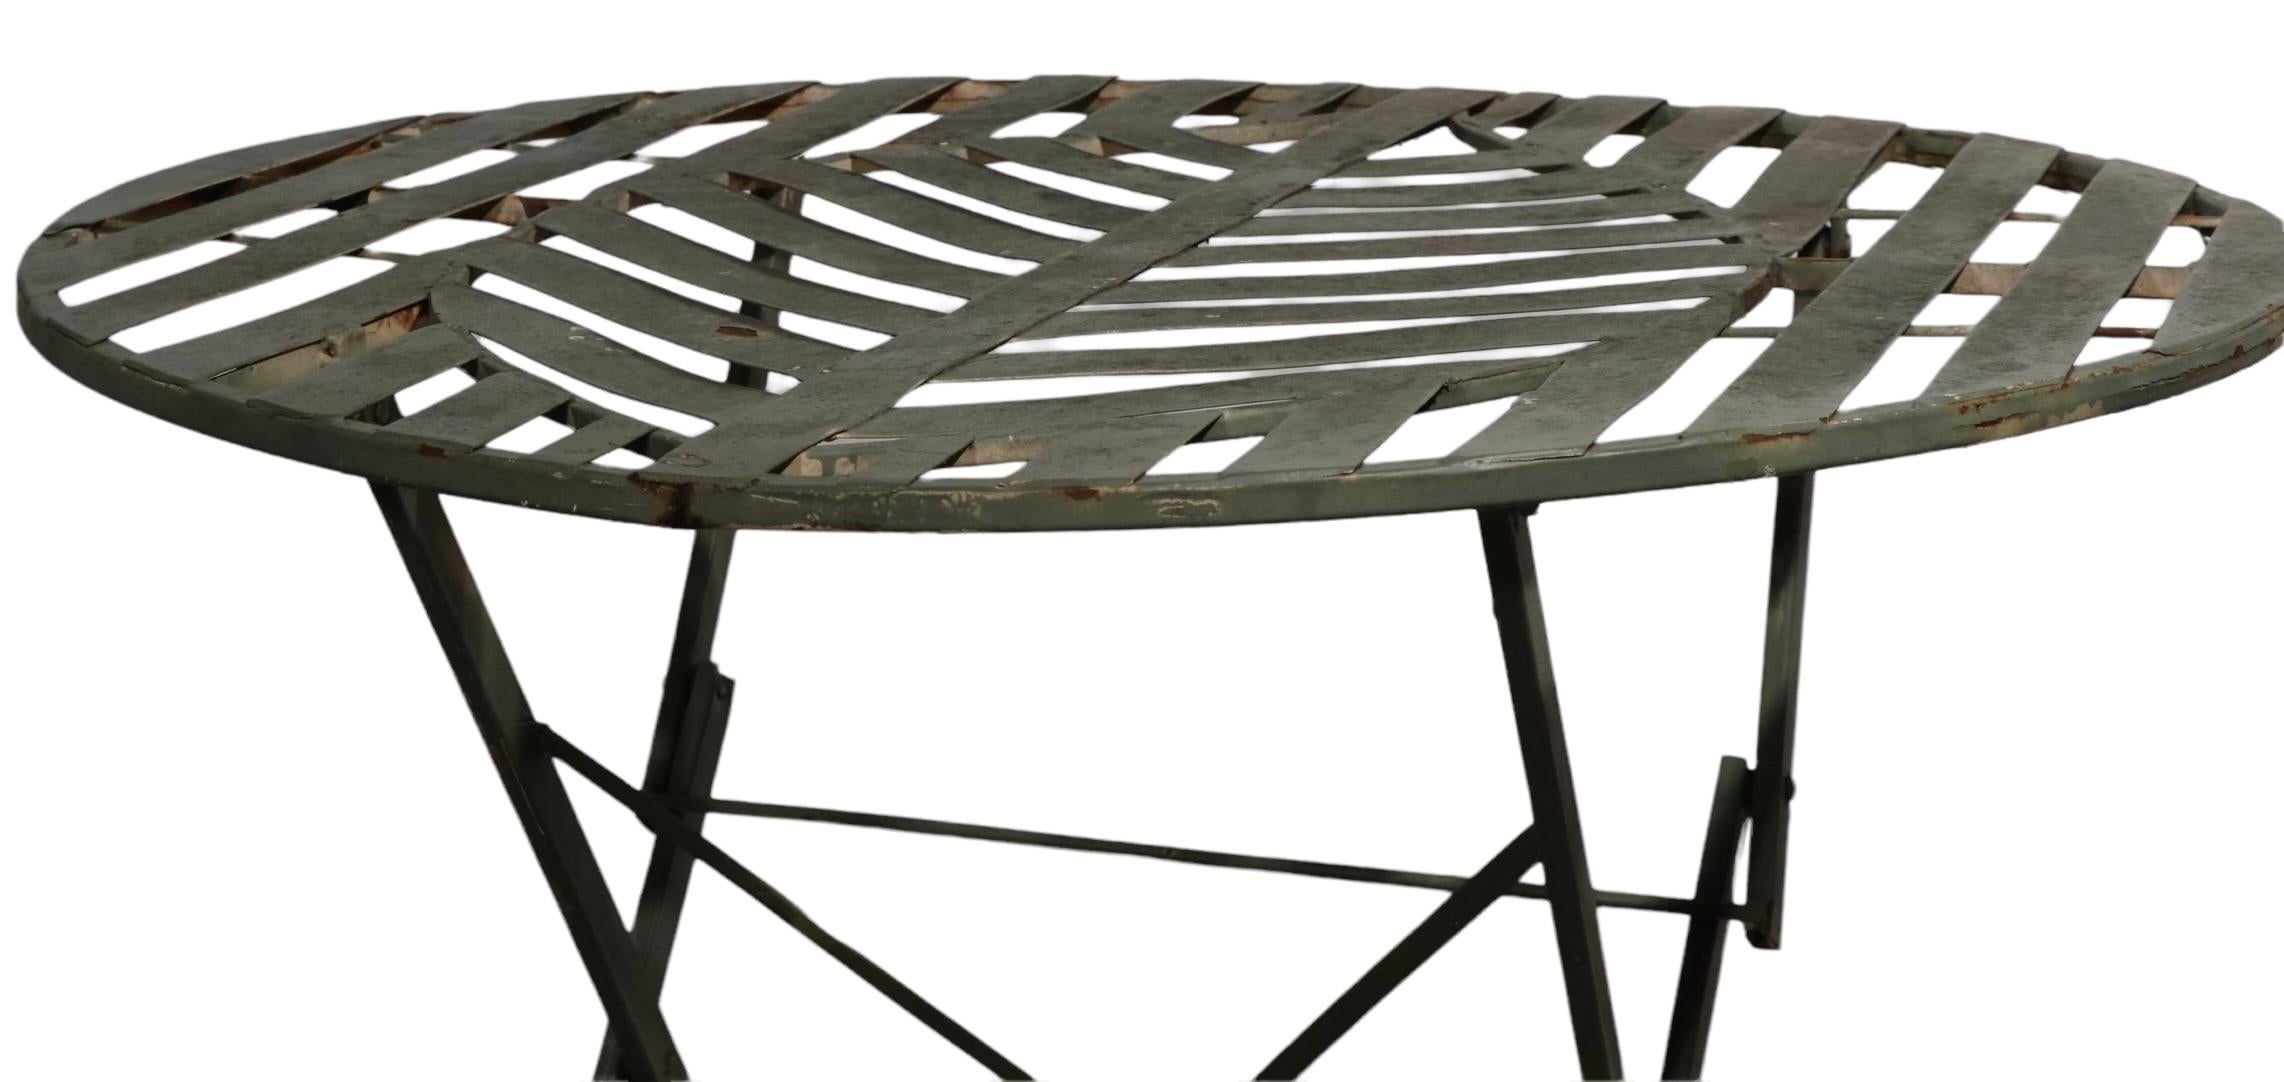 Art Deco Folding Metal Garden Patio Poolside Table with Stylized Leaf Motif Top For Sale